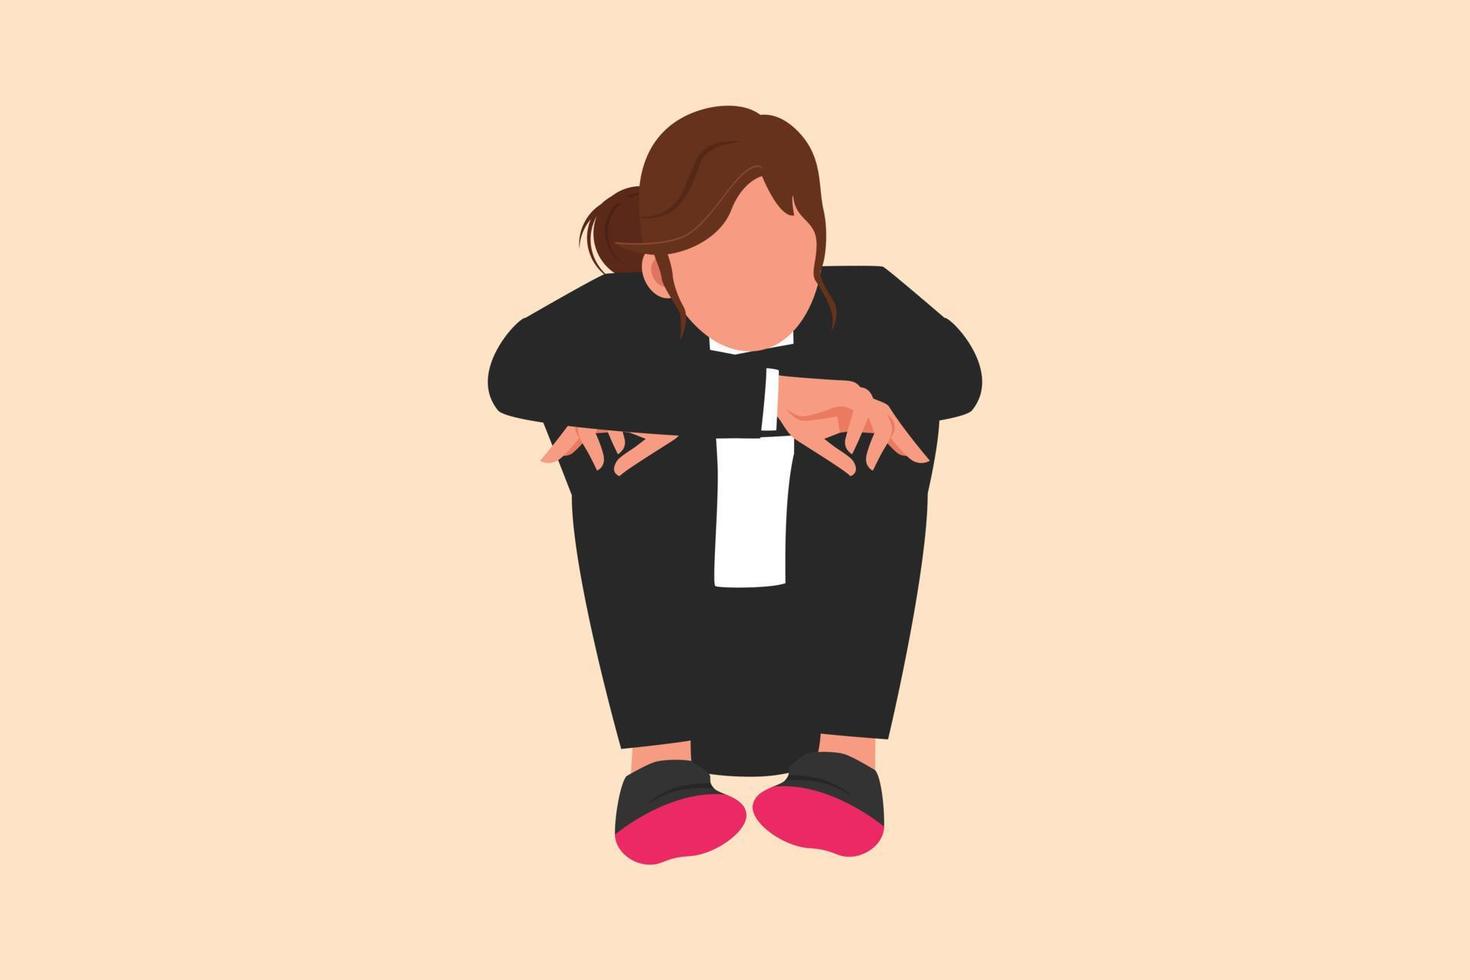 Business flat cartoon style drawing depressed businesswoman sadness melancholy stress sitting in despair on floor. Worker stressed losing job due to economic crisis. Graphic design vector illustration